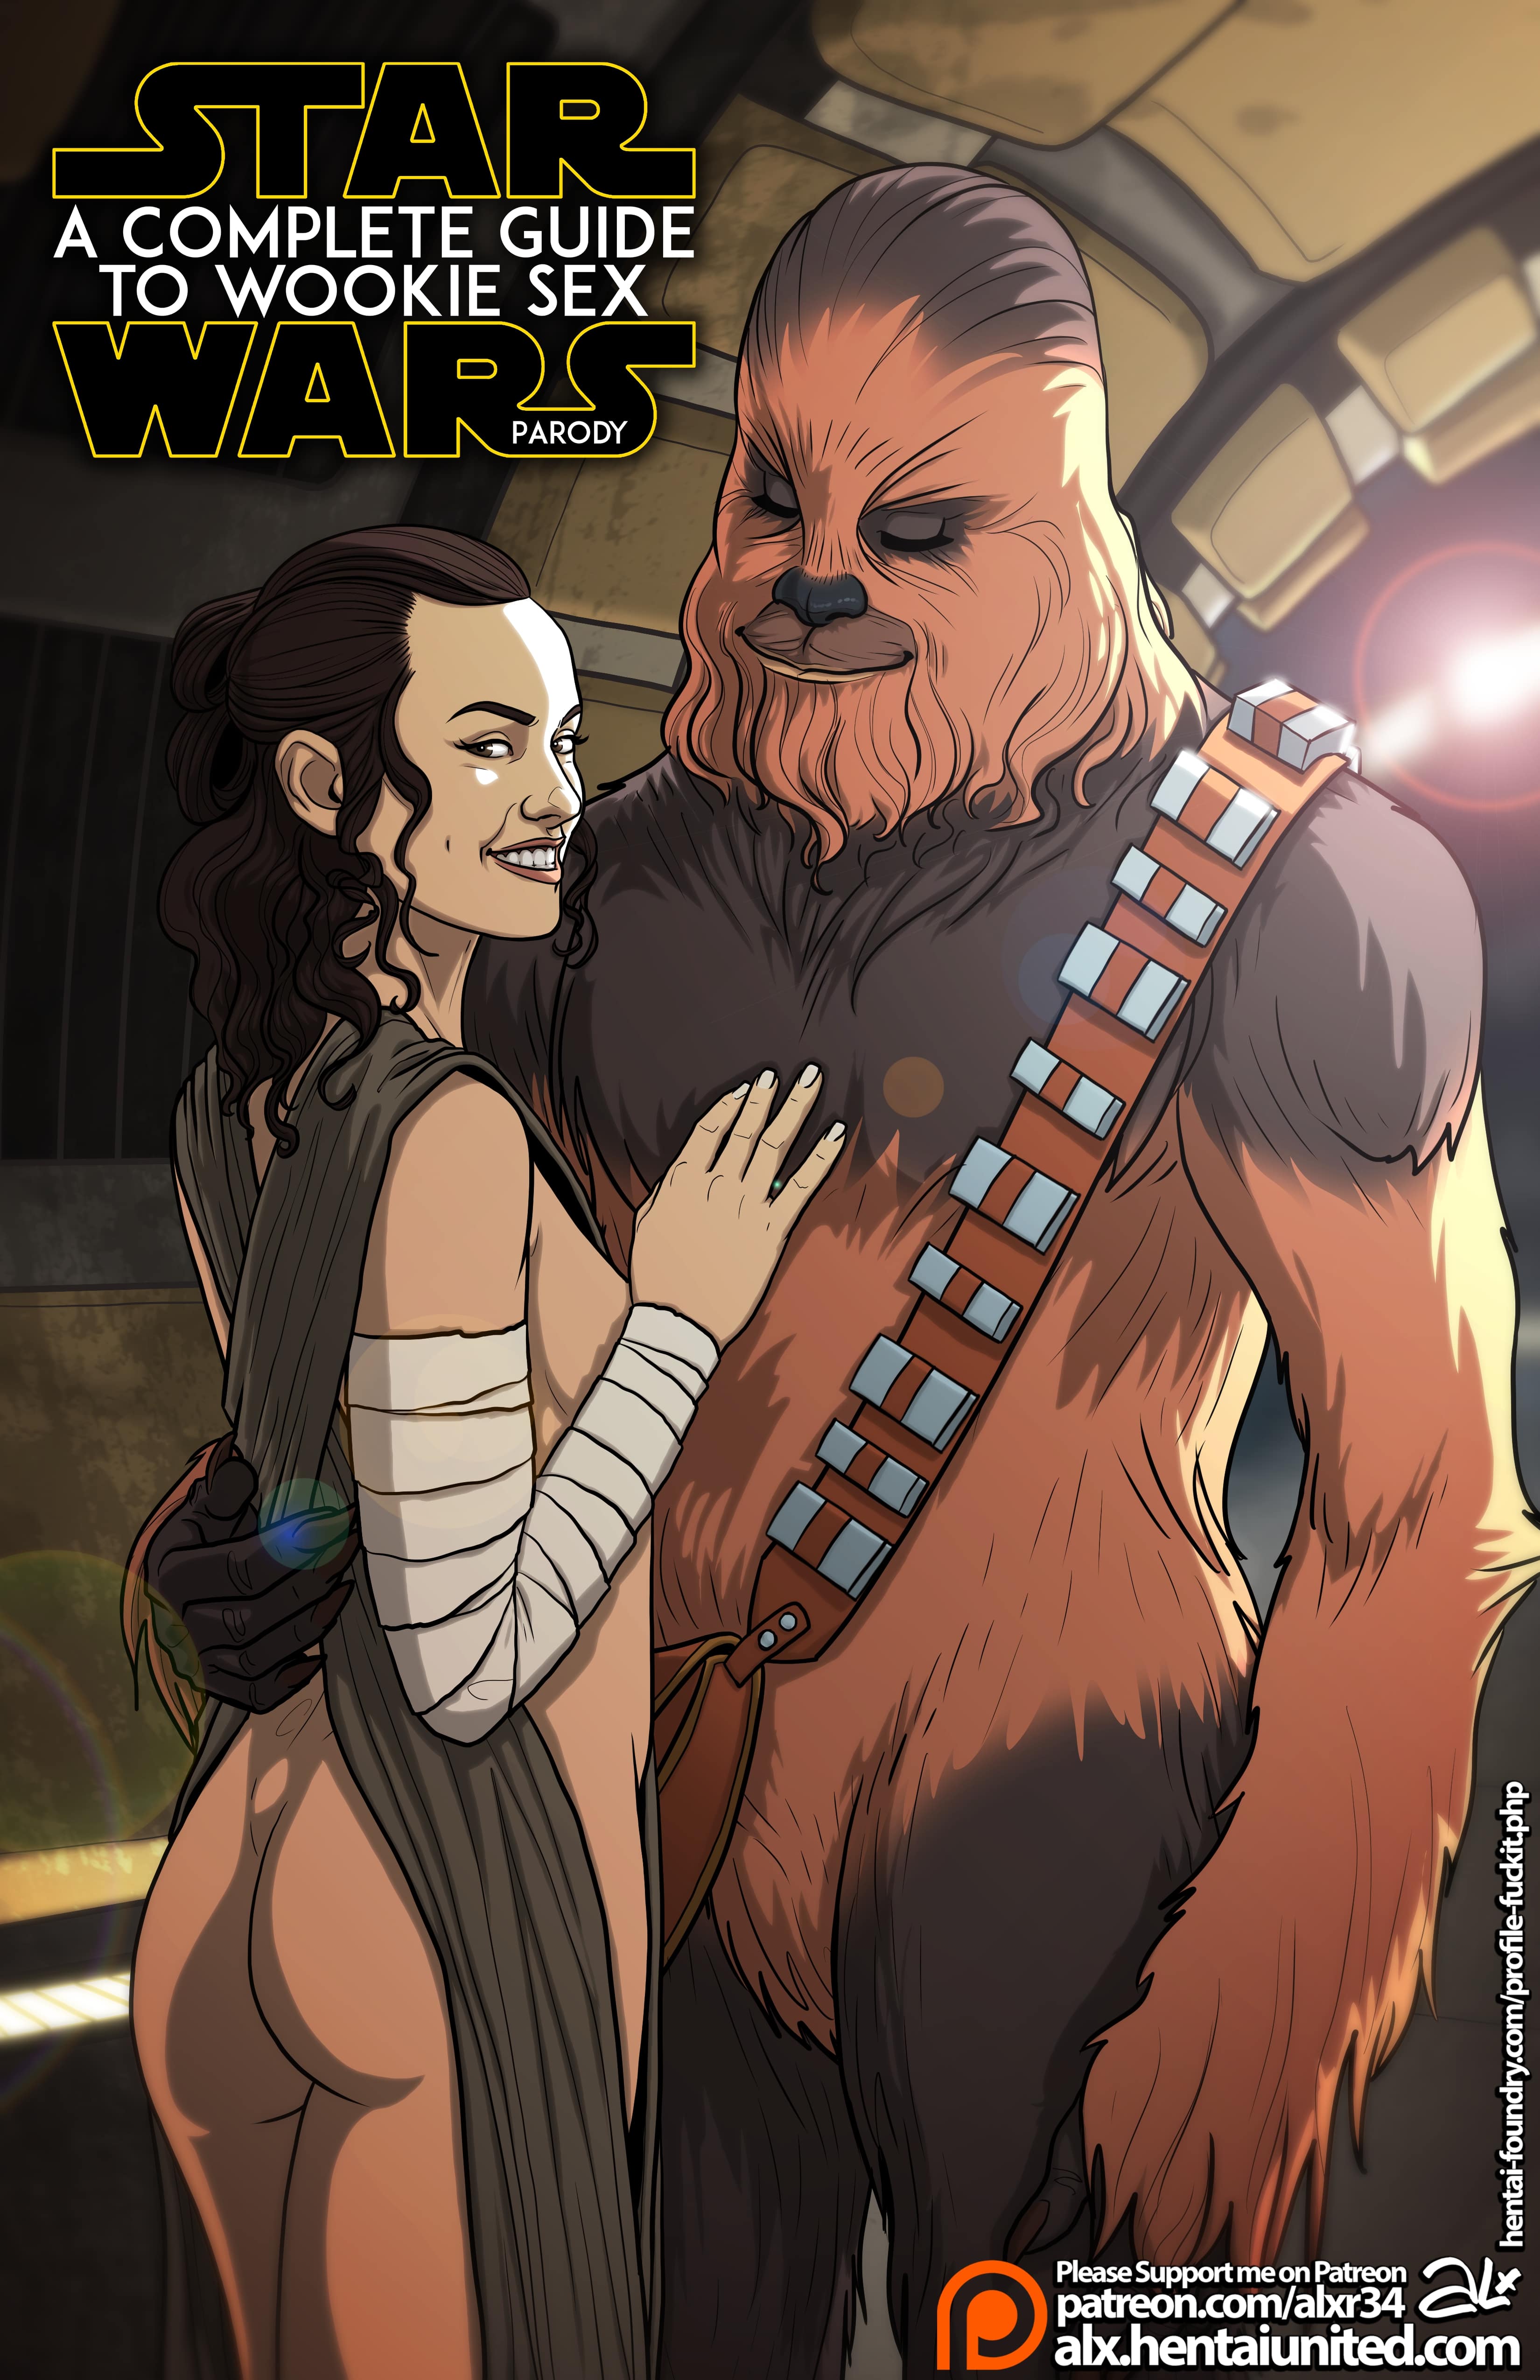 3300px x 5100px - Star Wars: A Complete Guide to Wookie Sex Porn Comics by [Alx] (Star Wars)  Rule 34 Comics â€“ R34Porn